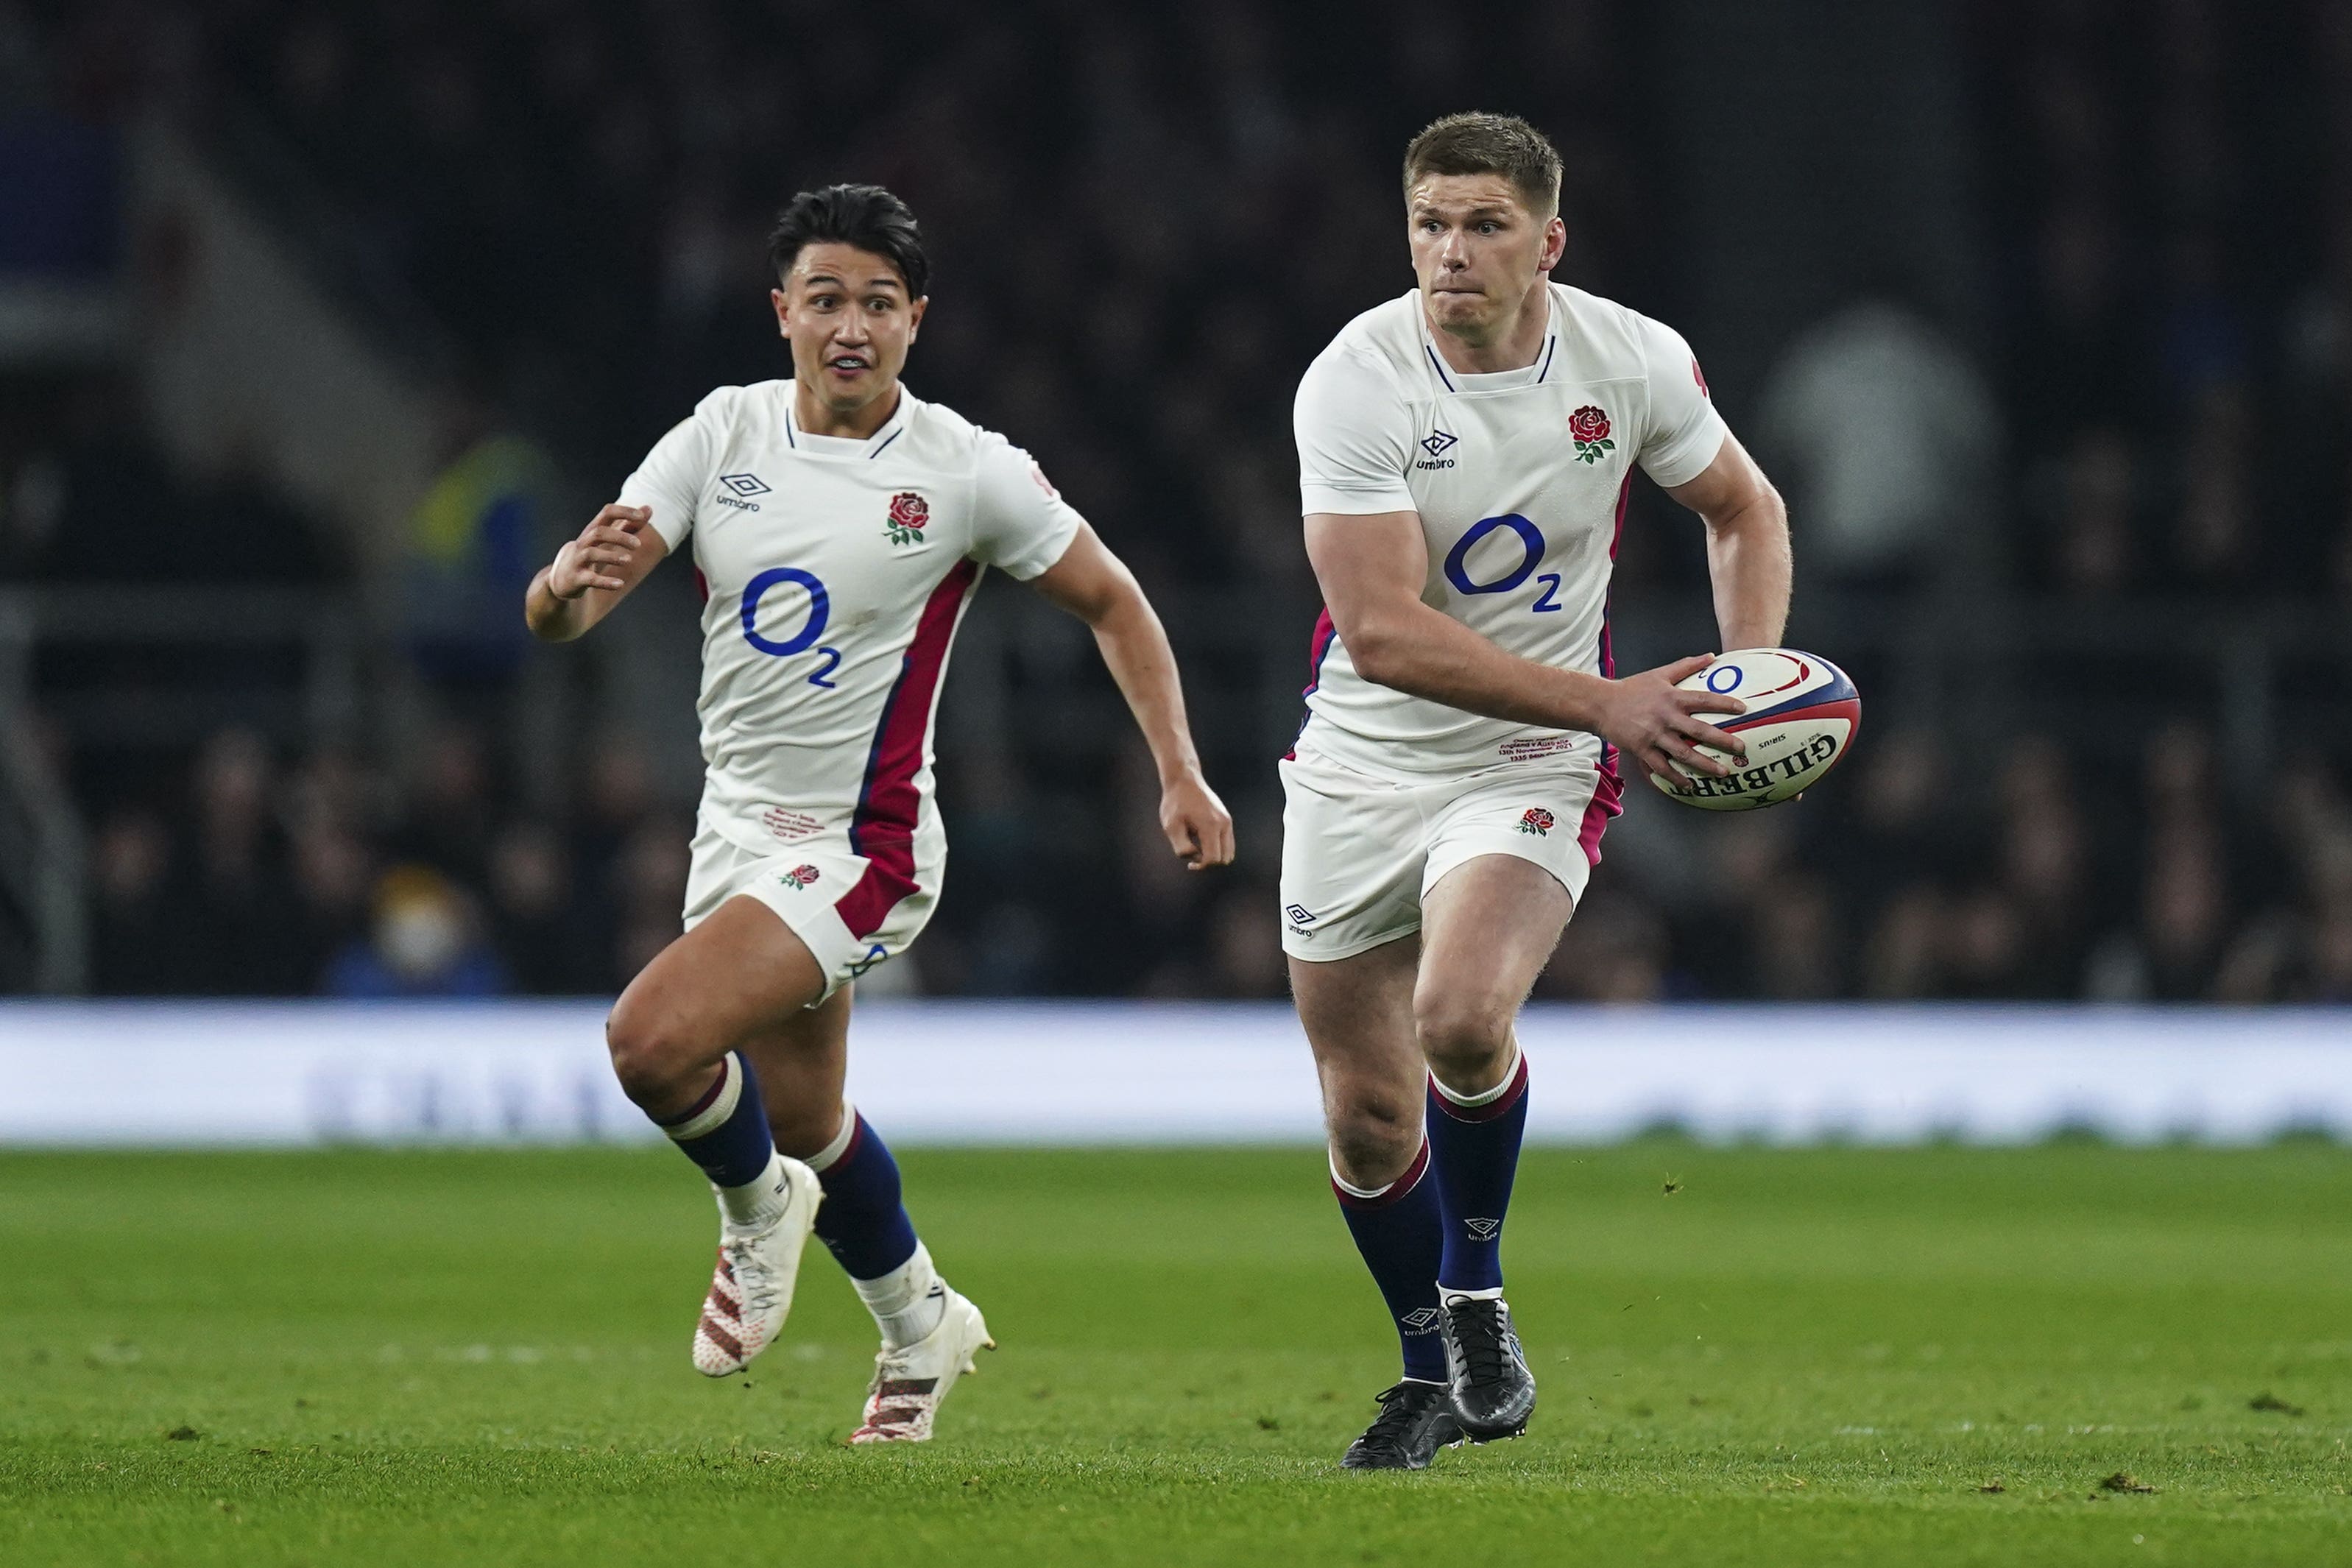 Marcus Smith and Owen Farrell are expected to continue in England’s midfield for the autumn (Mike Egerton/PA)